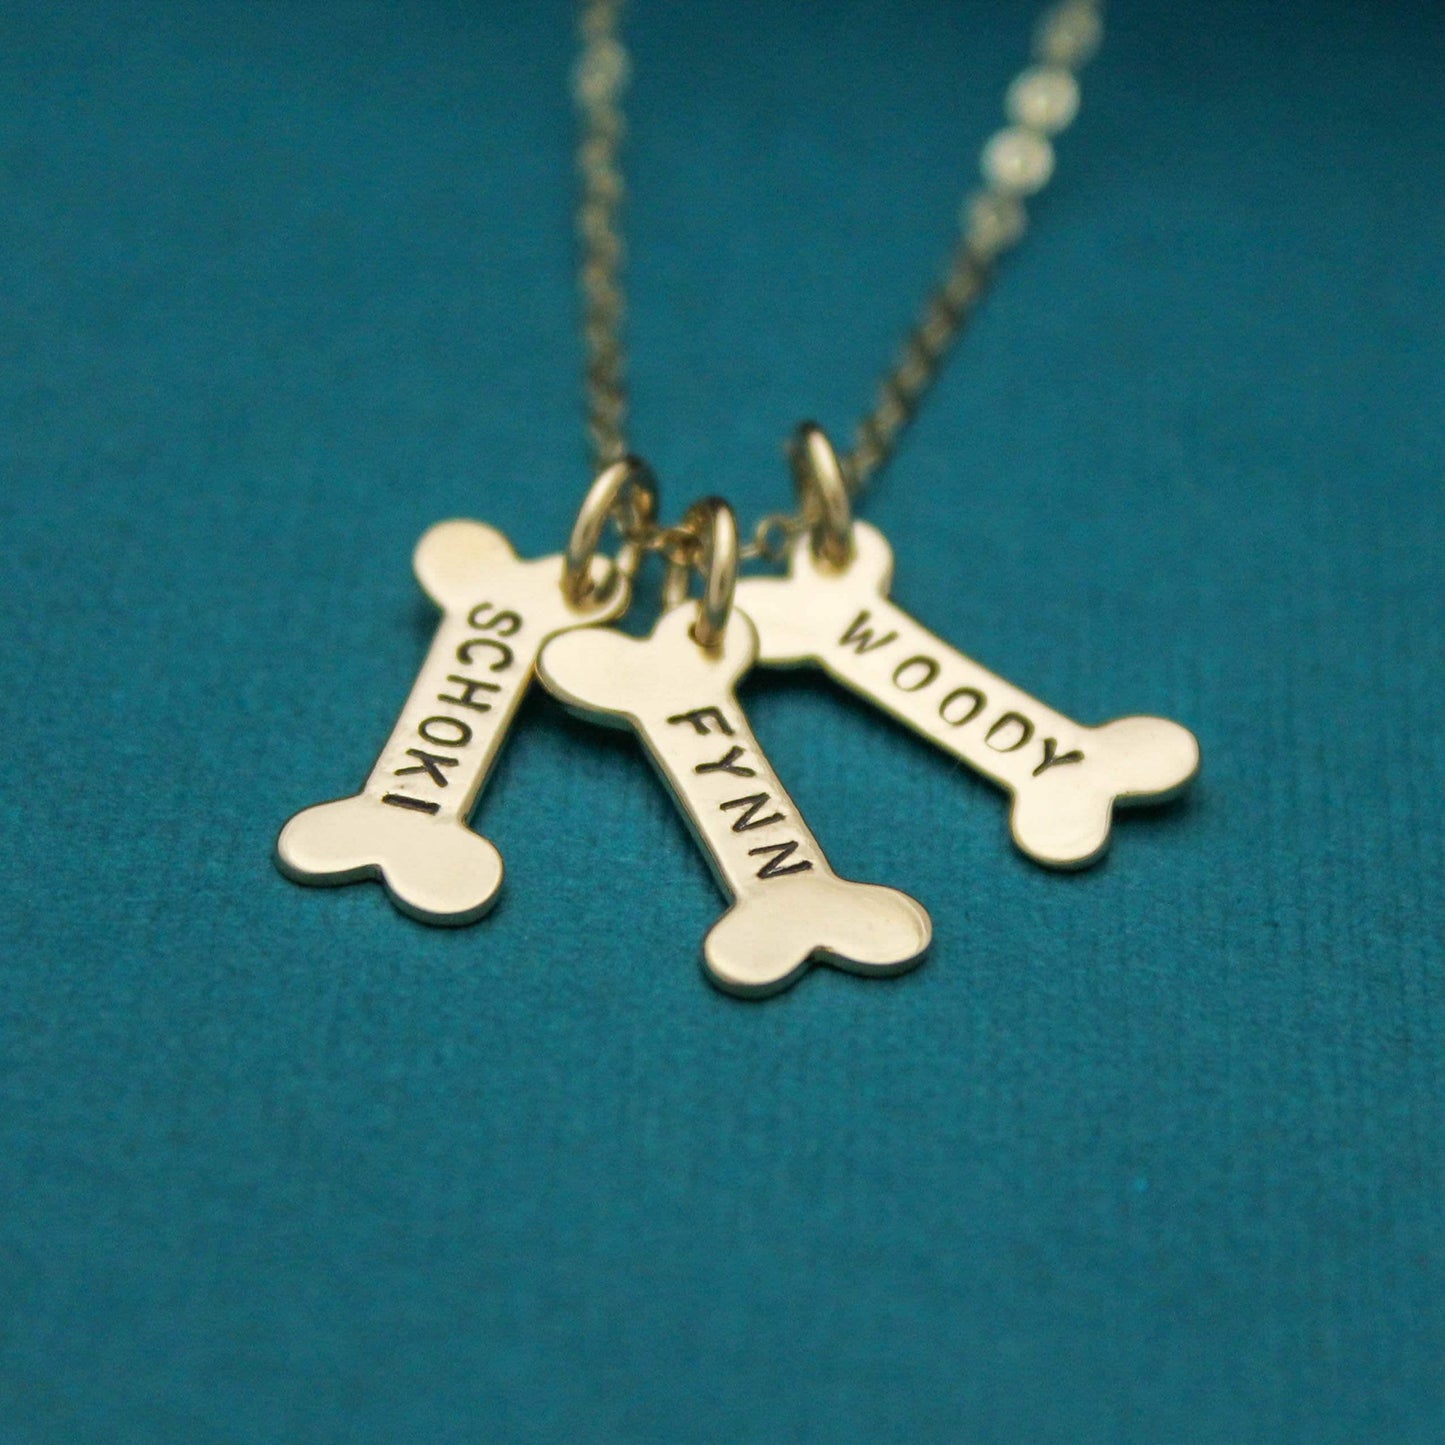 Personalized Dog Bone Necklace, Dog Lover Gift, Bone Necklace, Gifts for Dog Lovers, Gifts for Her, Hand Stamped Personalized Necklace